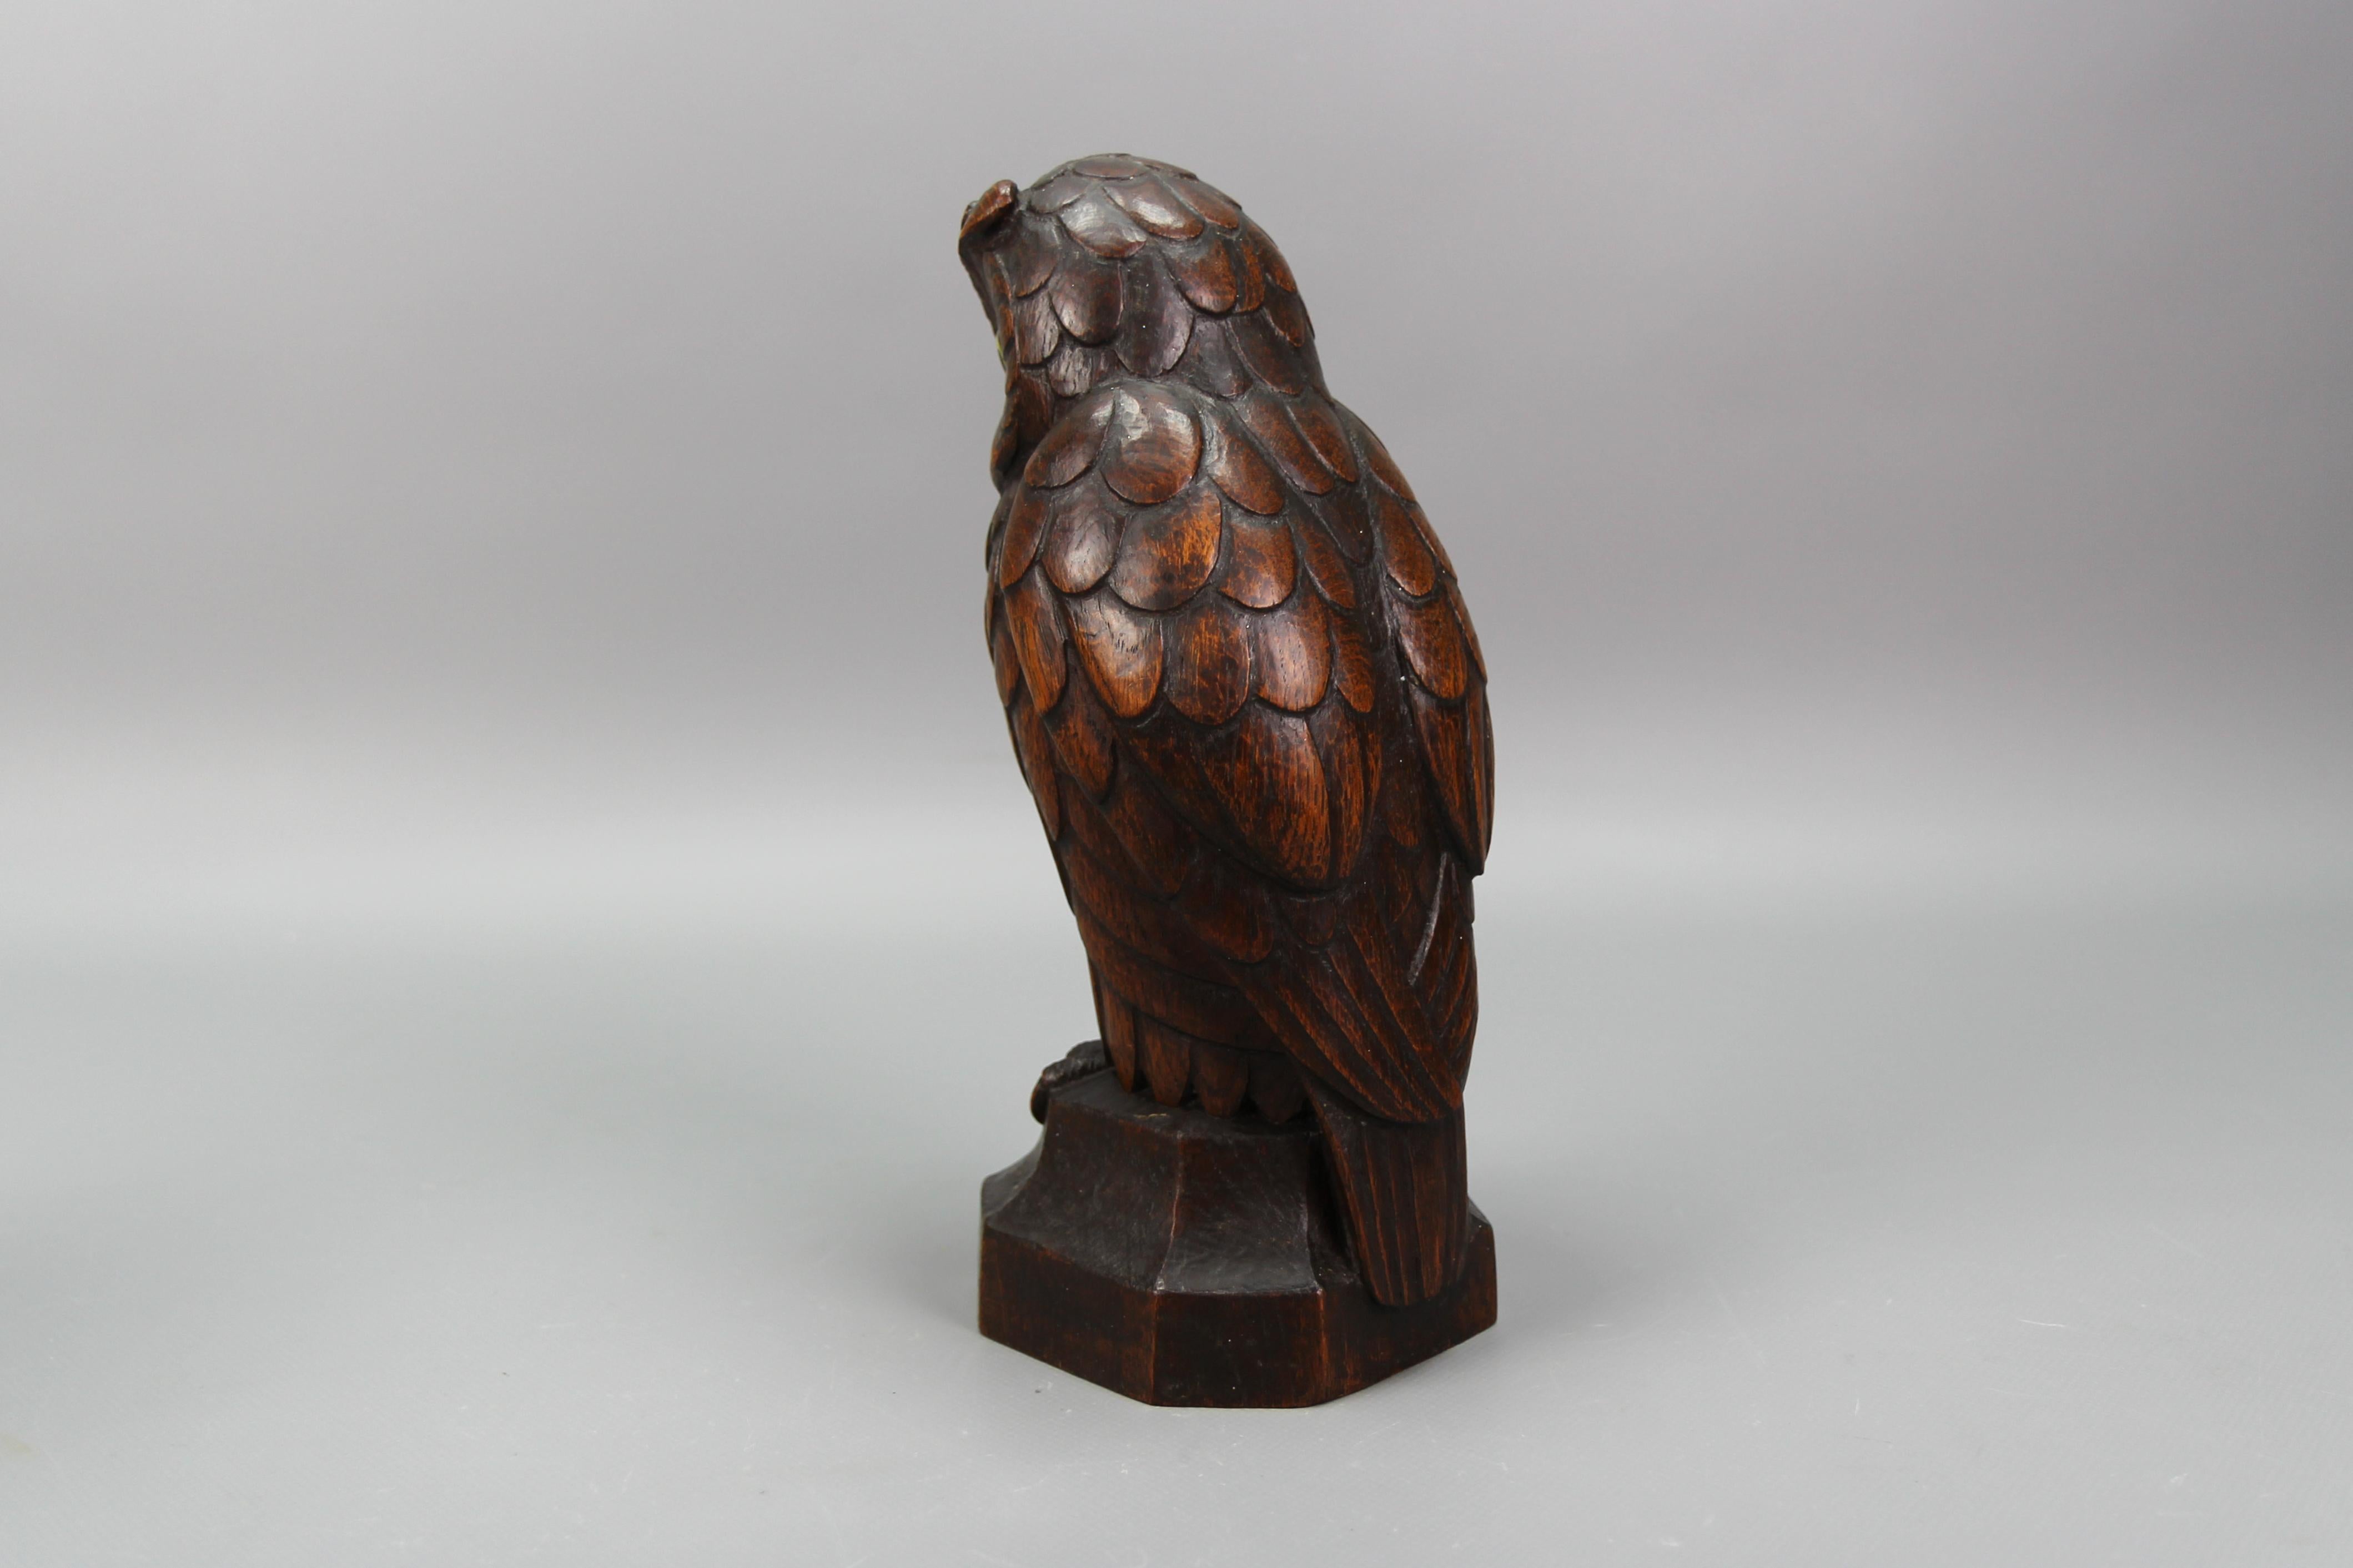 Hand-Carved Oakwood Owl Sculpture with Glass Eyes, Germany, 1930s For Sale 1